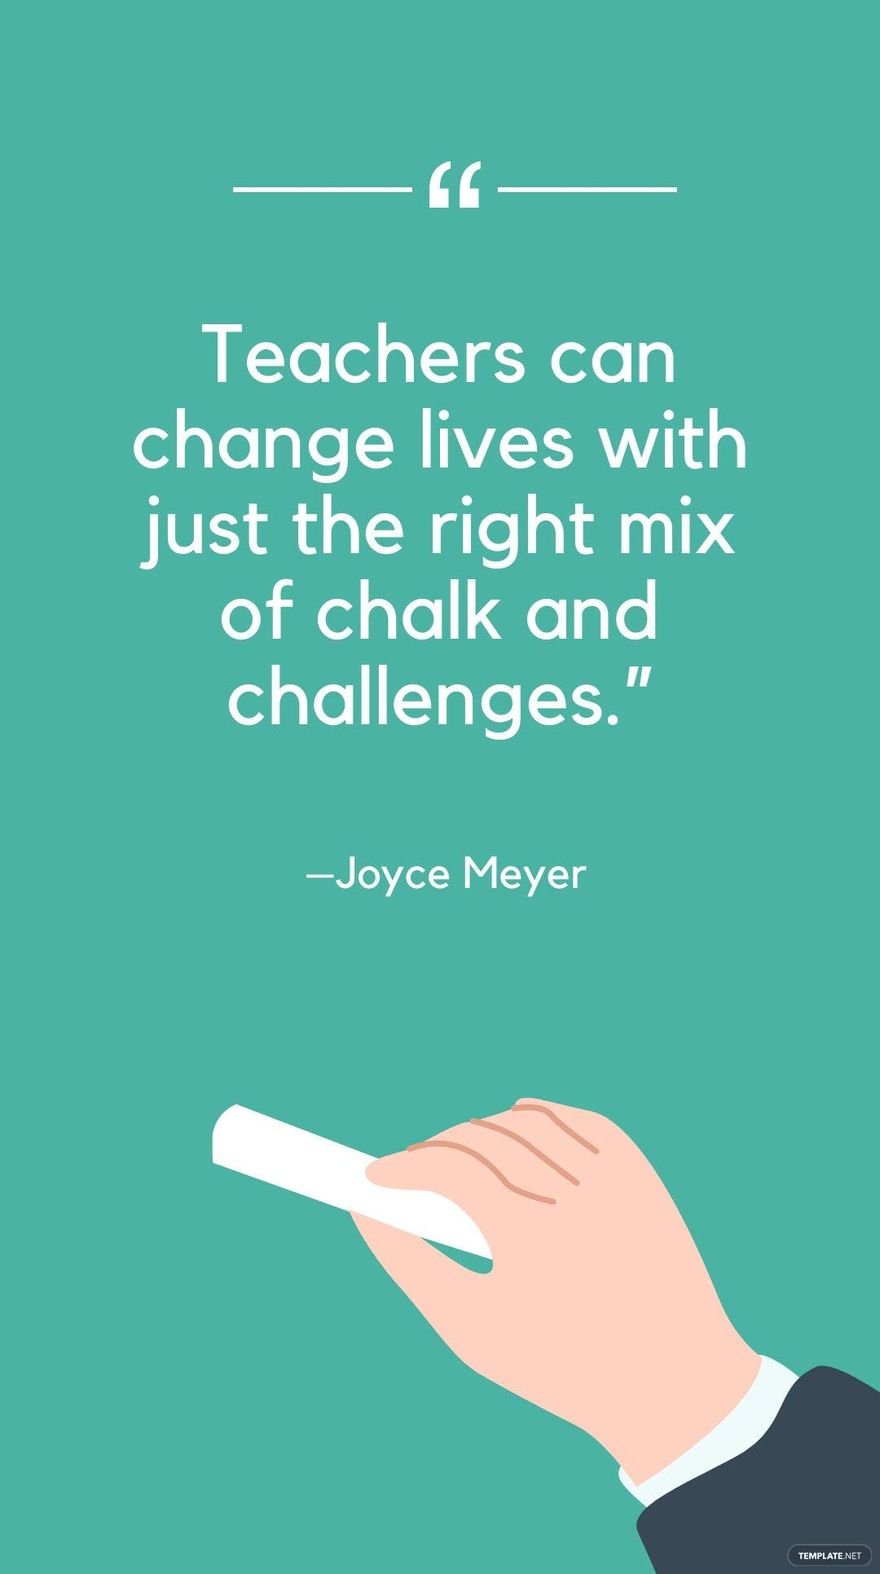 Joyce Meyer - Teachers can change lives with just the right mix of chalk and challenges.